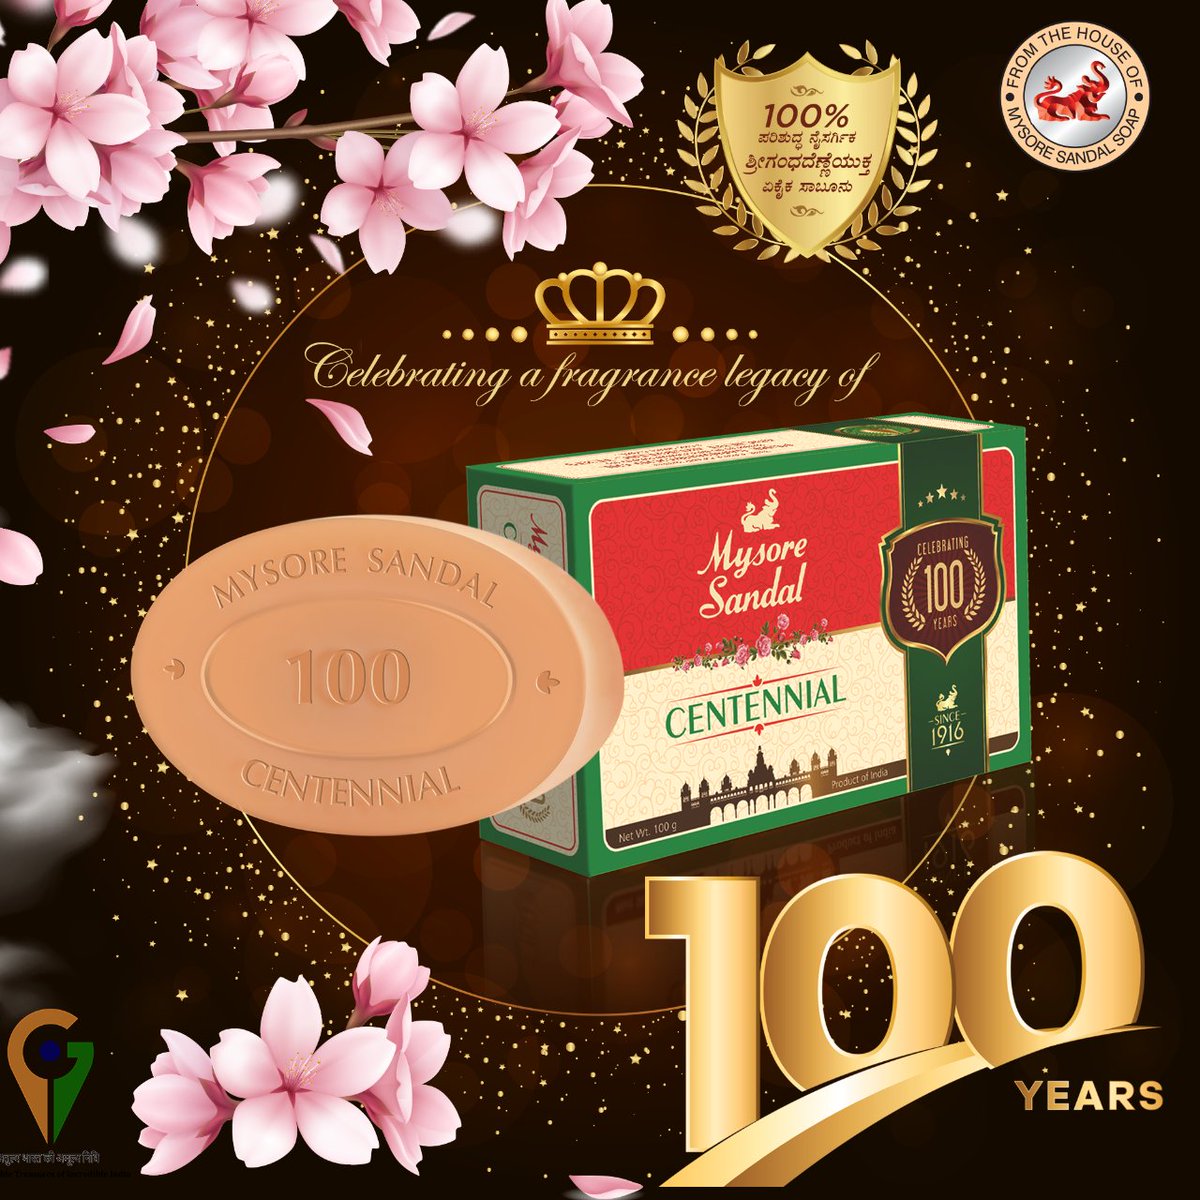 🎉 Celebrating 100 Years of Tradition with Mysore Sandal Centennial Soap! 🌿✨ Experience luxury and purity in every lather.

#MysoreSandal #CentennialCelebration #MysoreSandal #PureSandal #mysoresandalproducts